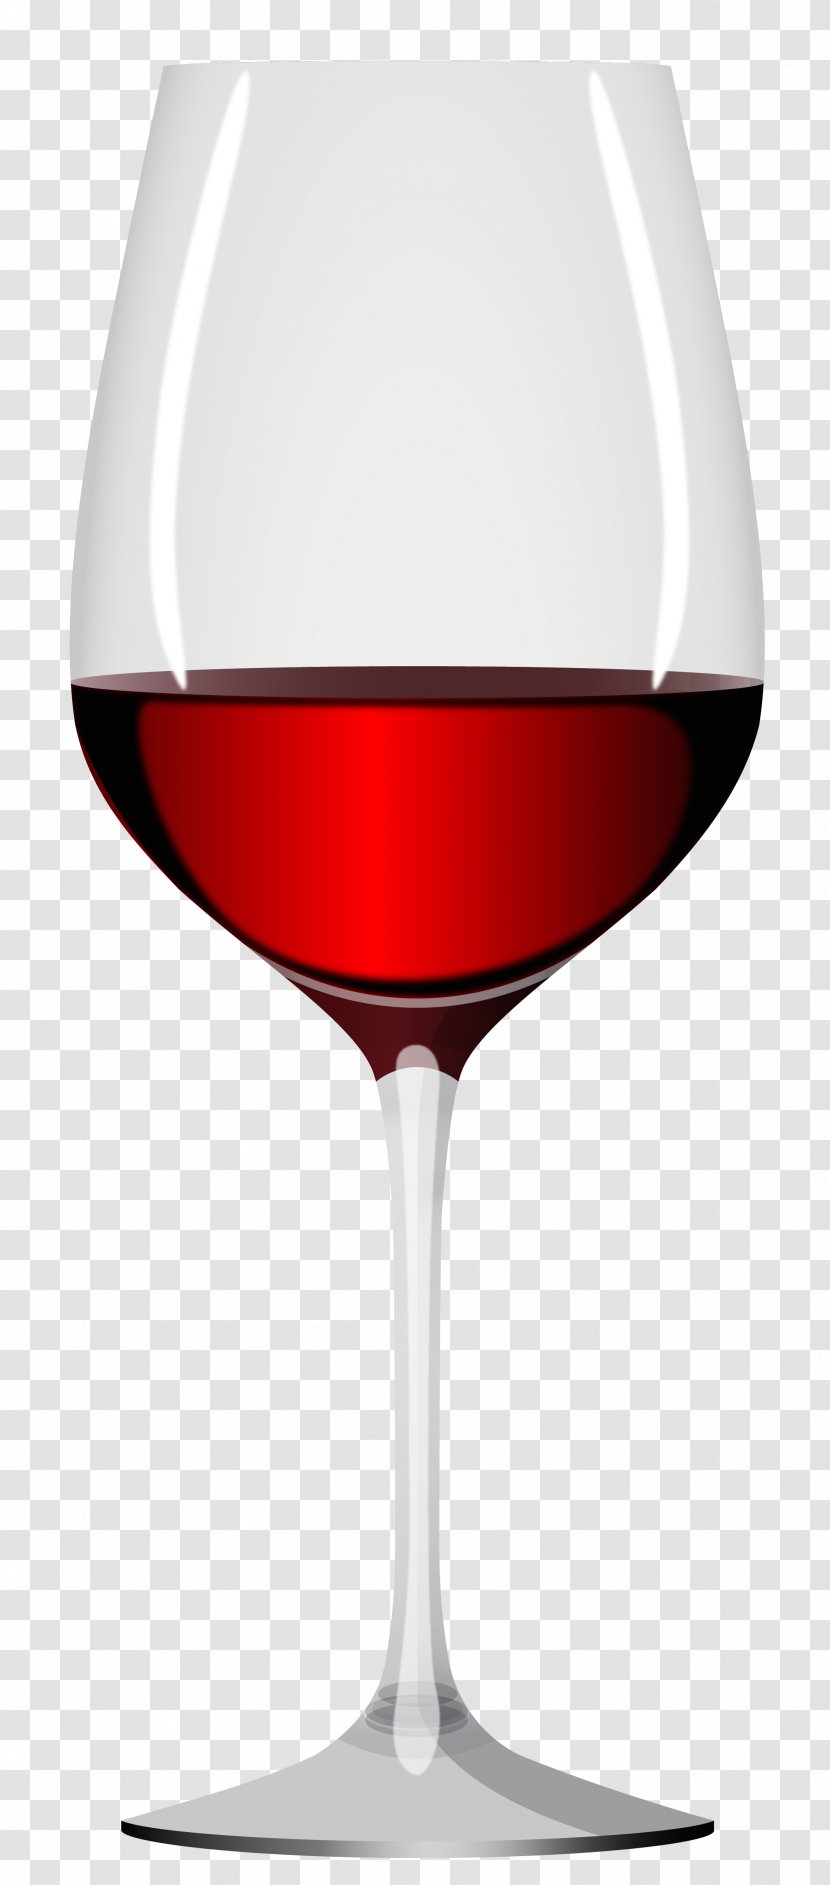 Red Wine Champagne Glass Clip Art - Bottle - Of Clipart Image Transparent PNG